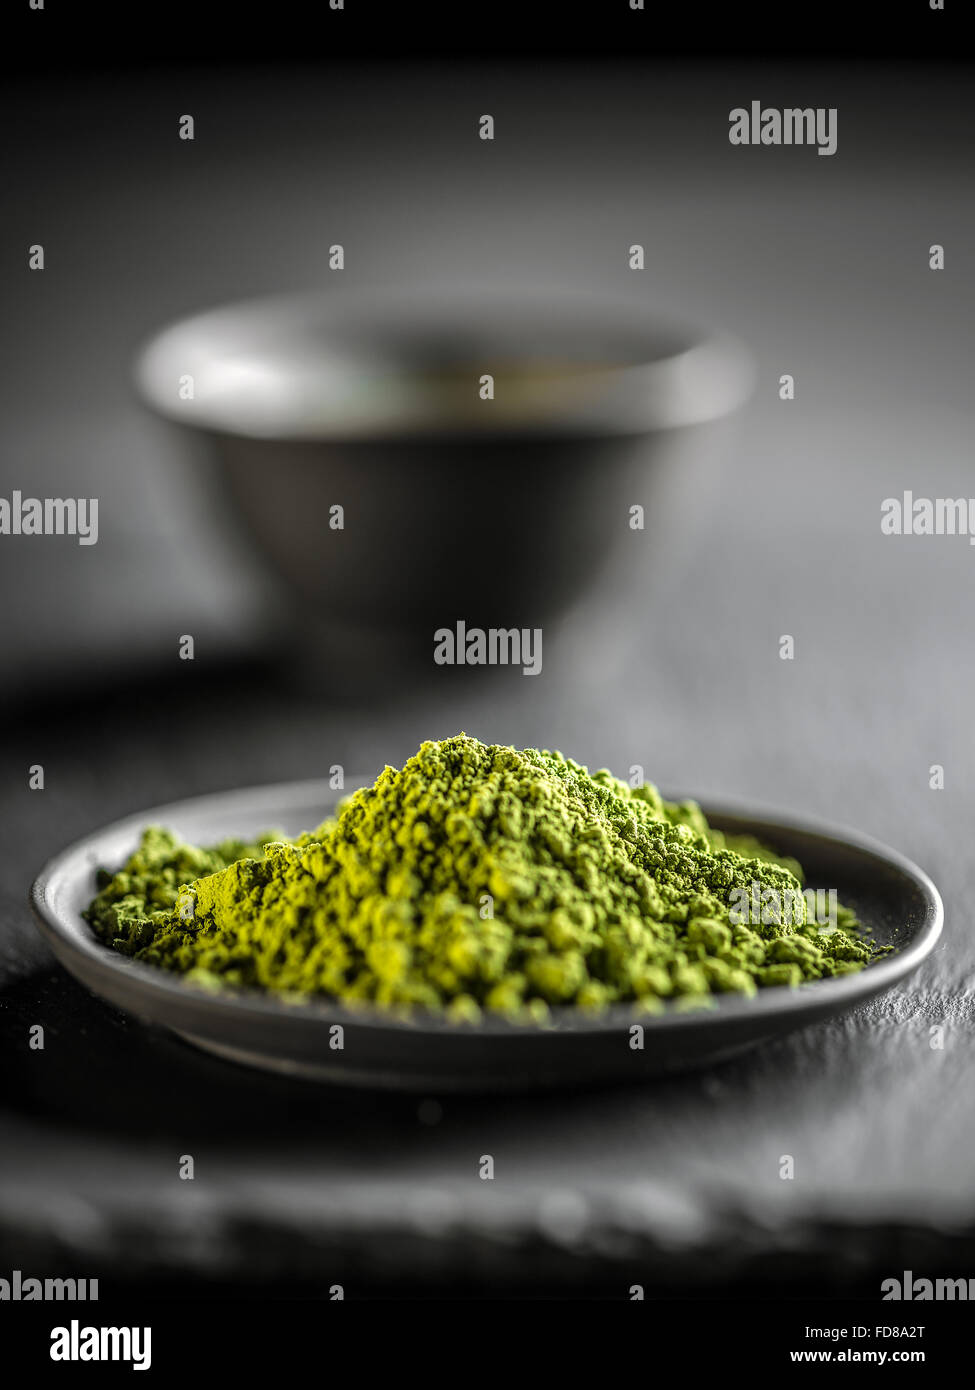 Macha green powder in a plate on black background Stock Photo